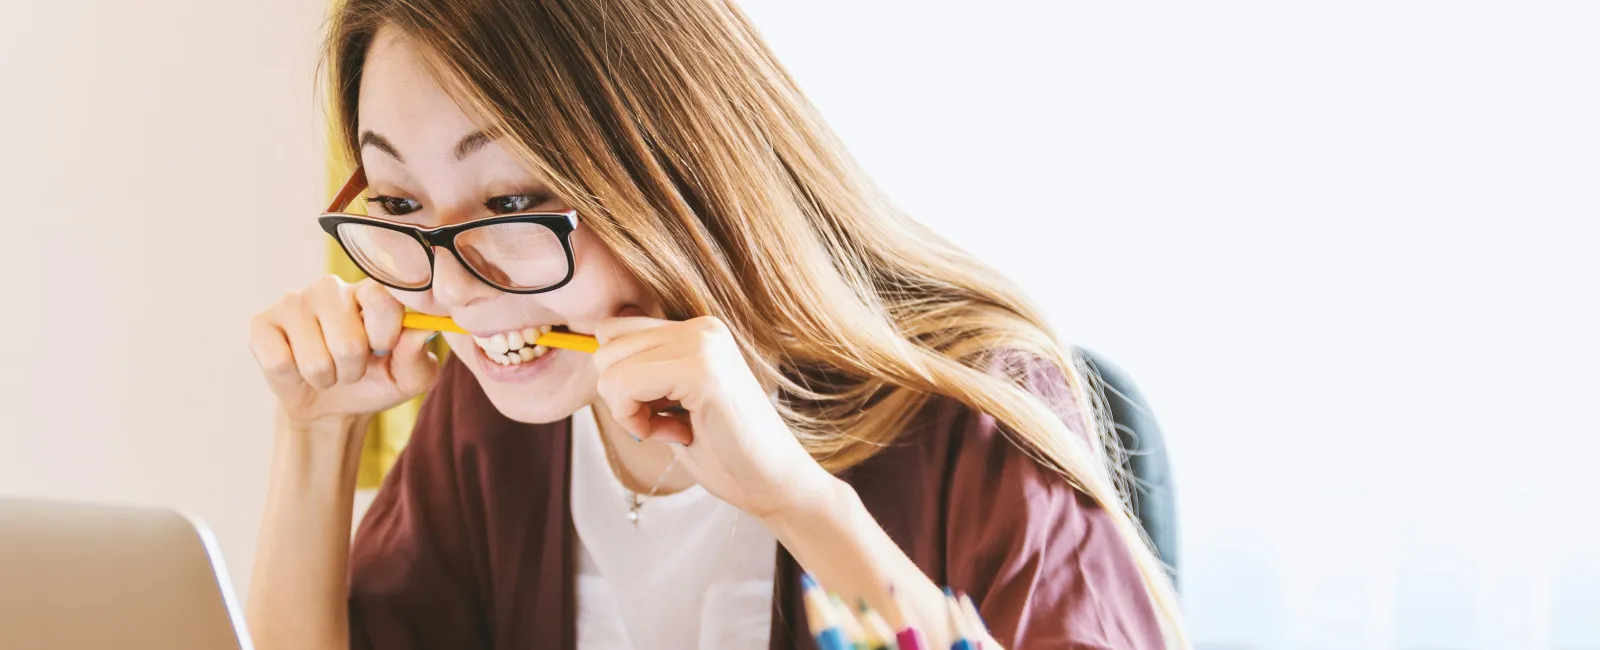 a woman with glasses and a pencil in her mouth